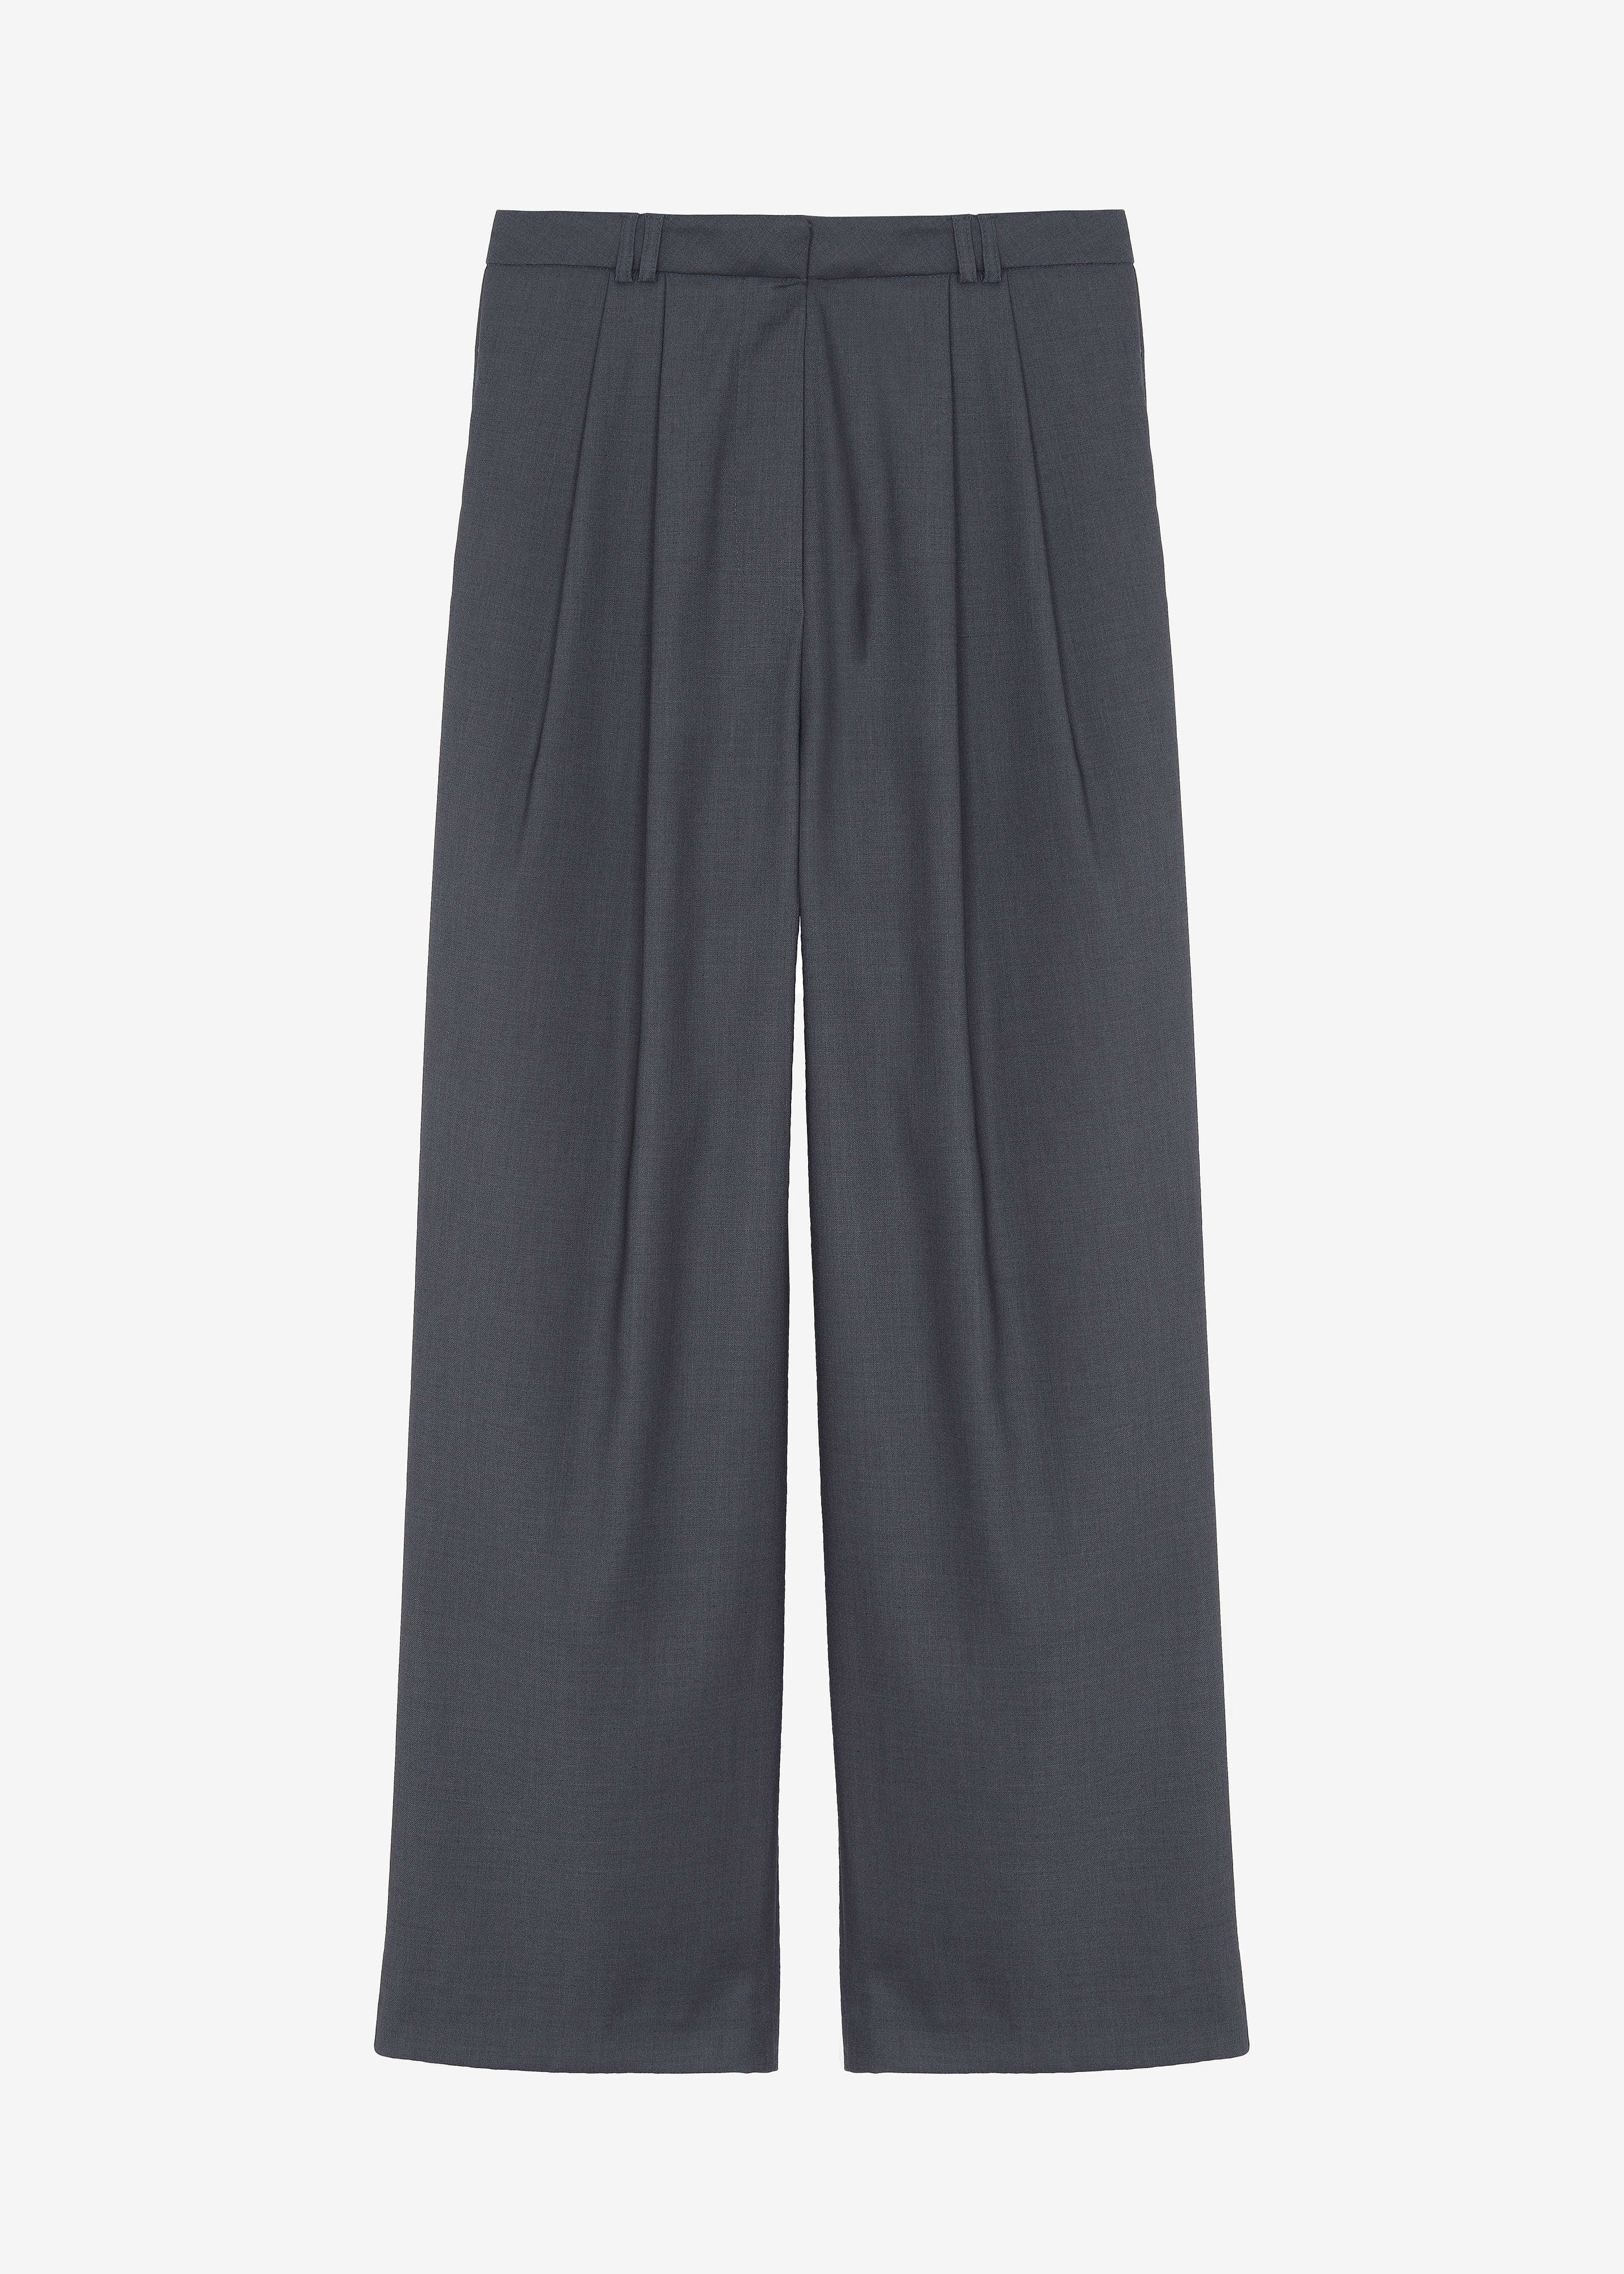 Durban Trousers - Charcoal - 6